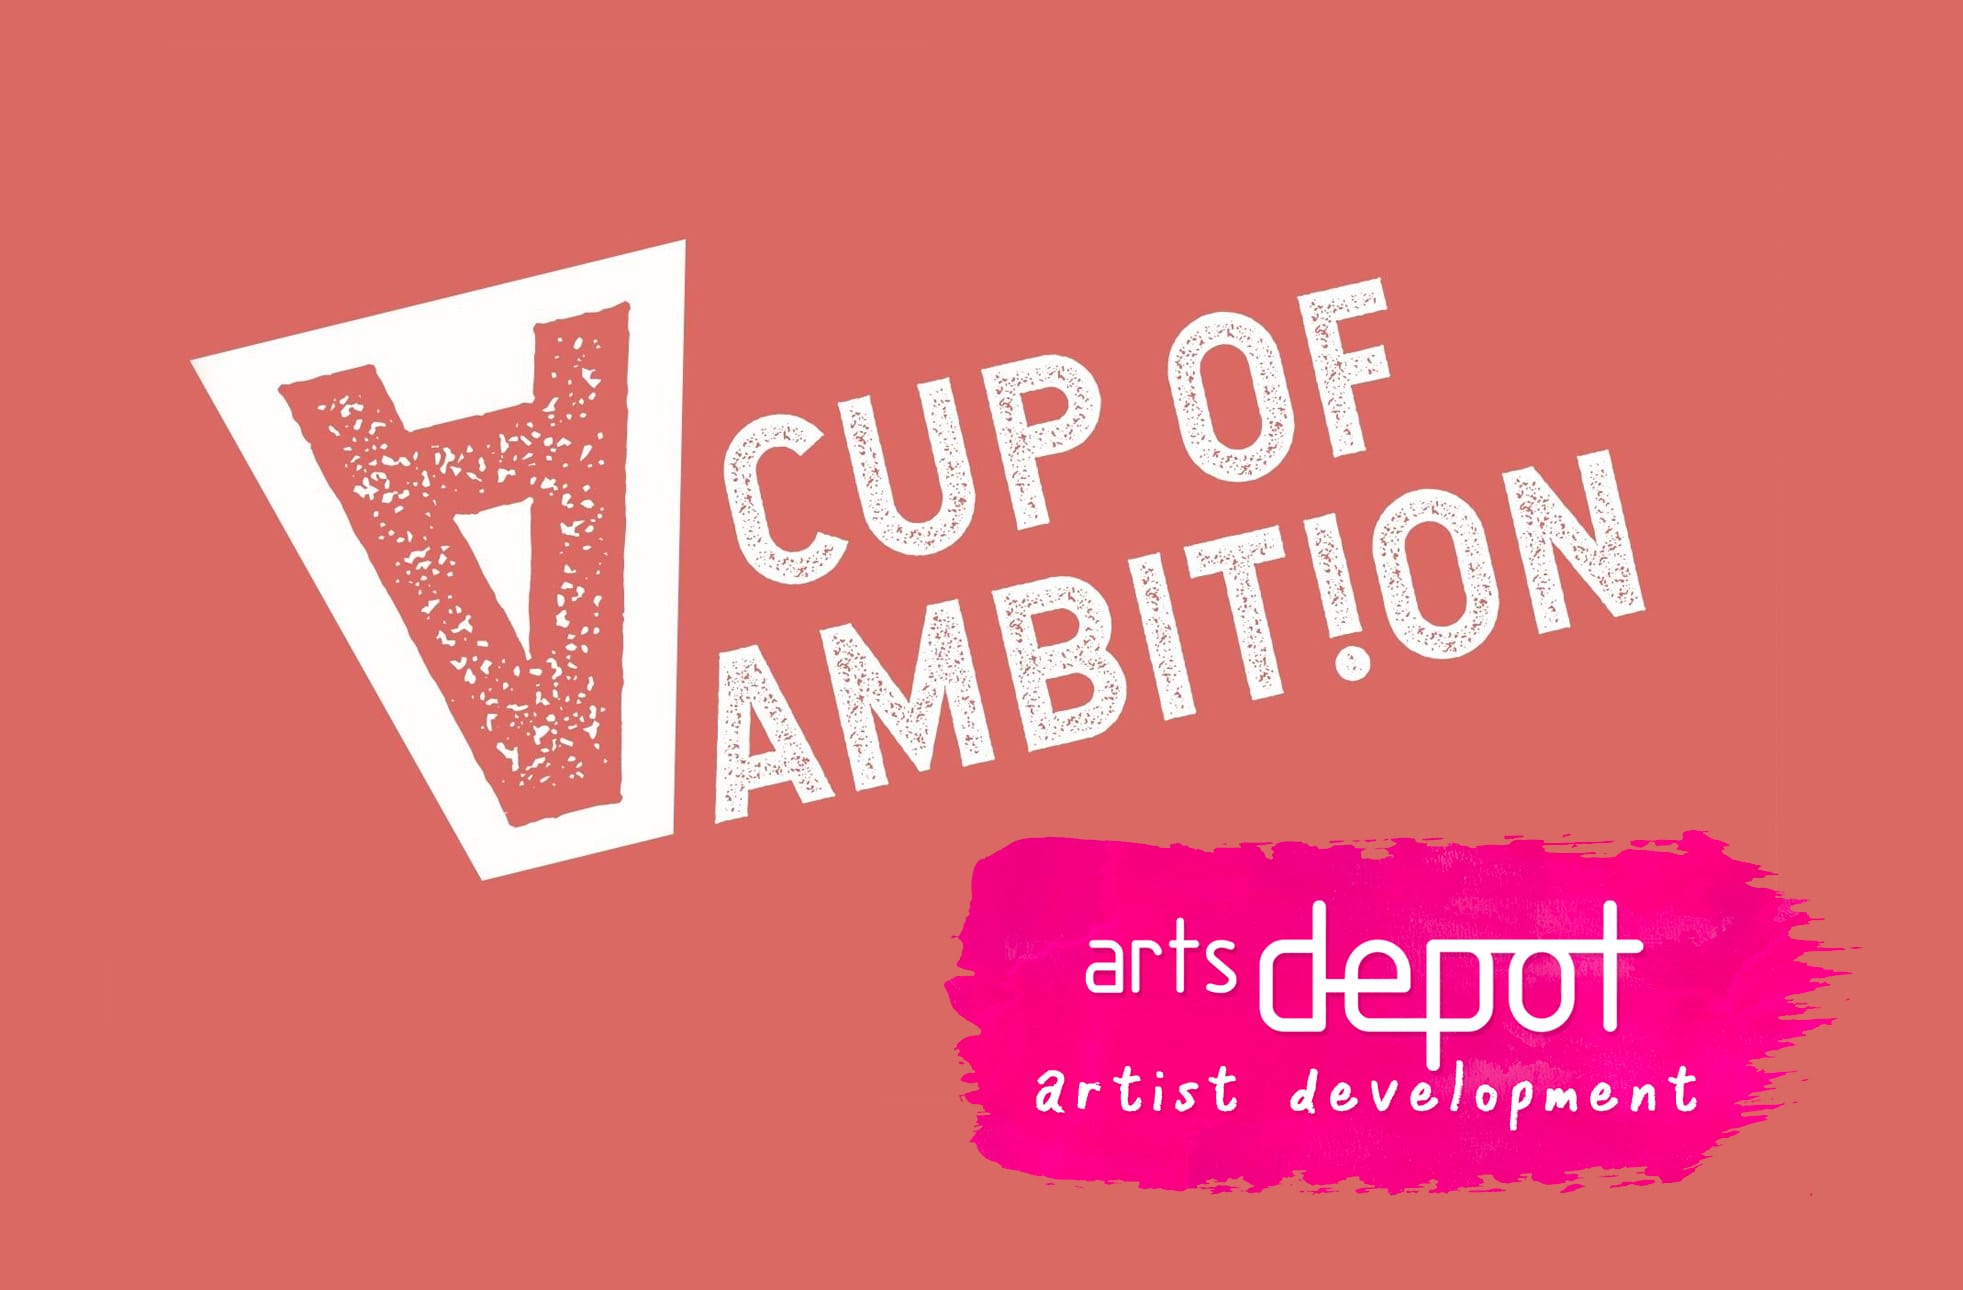 A dark peach coloured background, with white logo text in the centre, reading: A Cup Of Ambition. In the logo text, the 'i' is swapped out for an exclamation mark. In the bottom right-hand corner, a smaller pink paint stroke logo reads 'artsdepot artist development'.